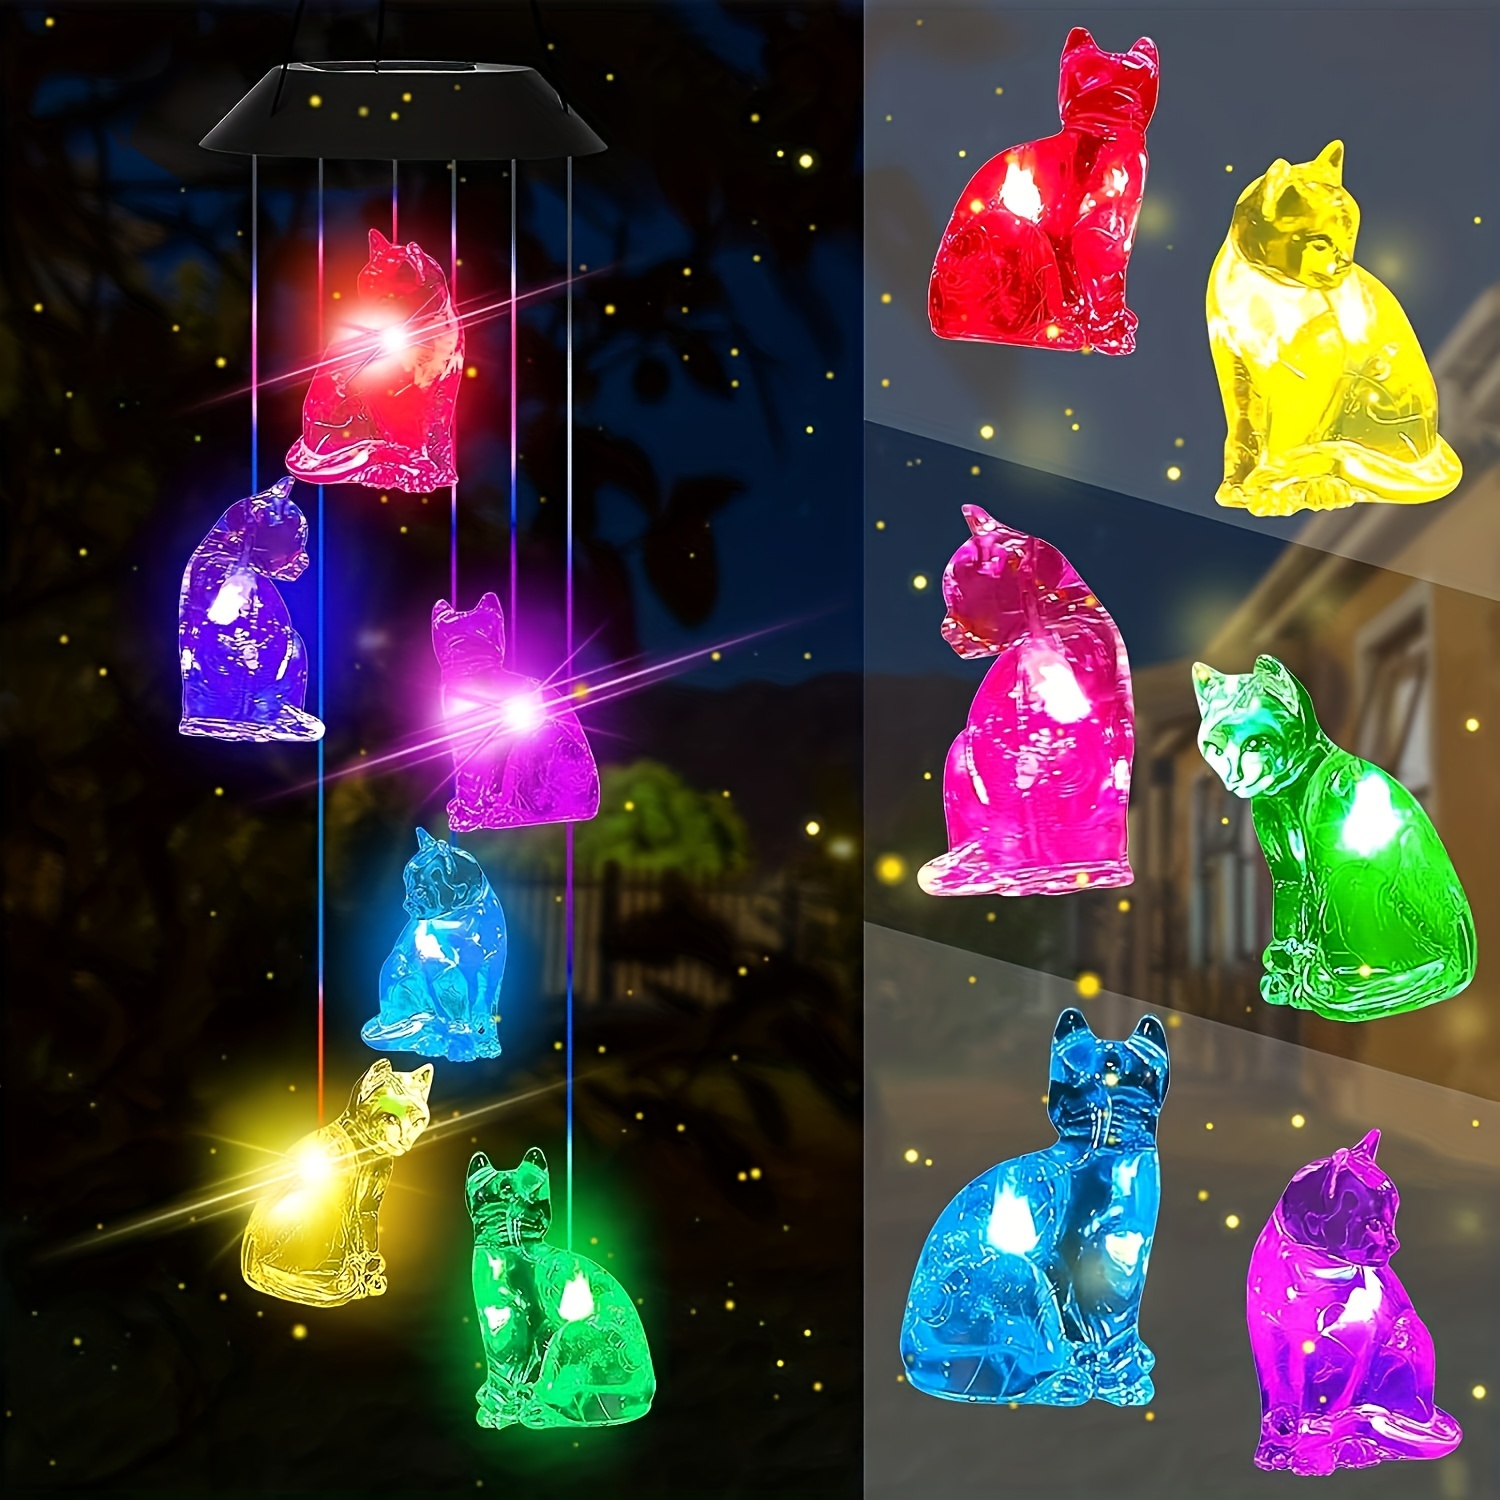 

Solar-powered Cat Wind Chimes With Color-changing Lights - Perfect Gift For Mom, Led Garden & Patio Decor